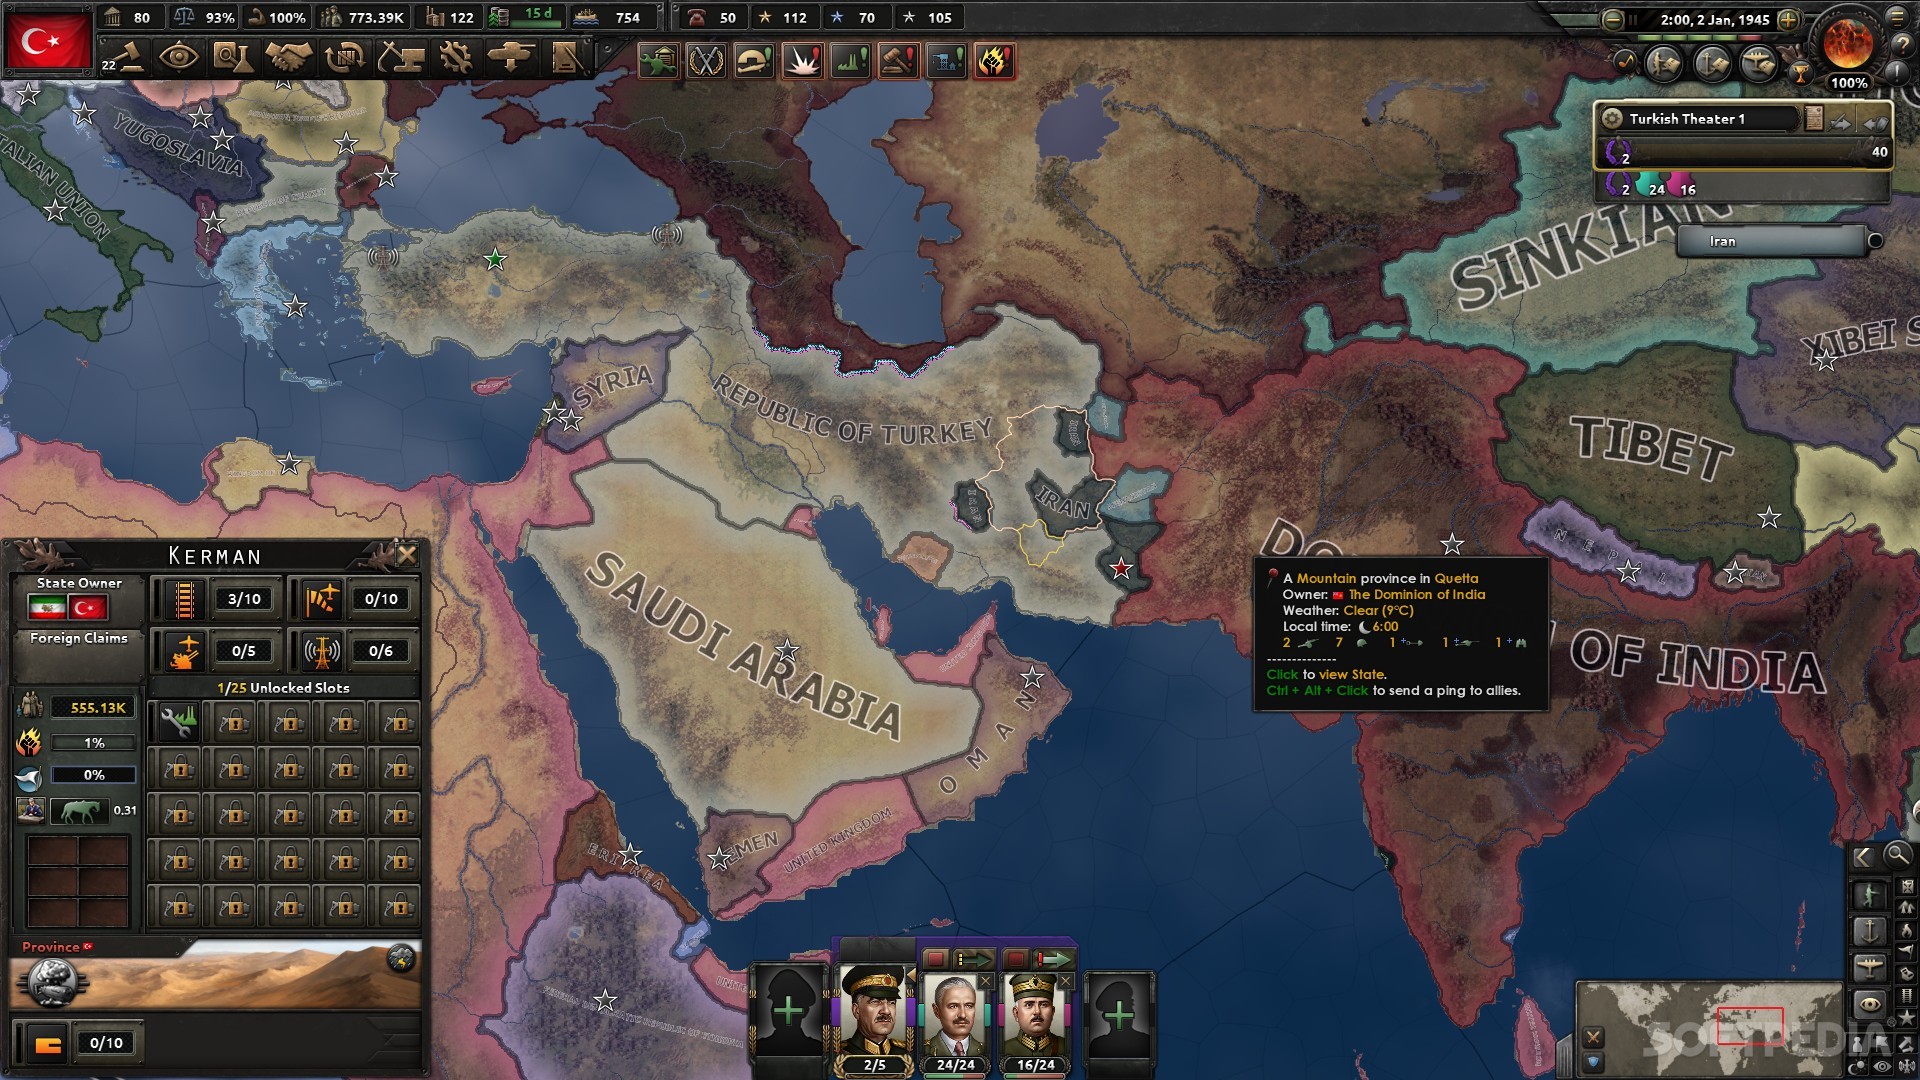 hearts of iron 4 decisions